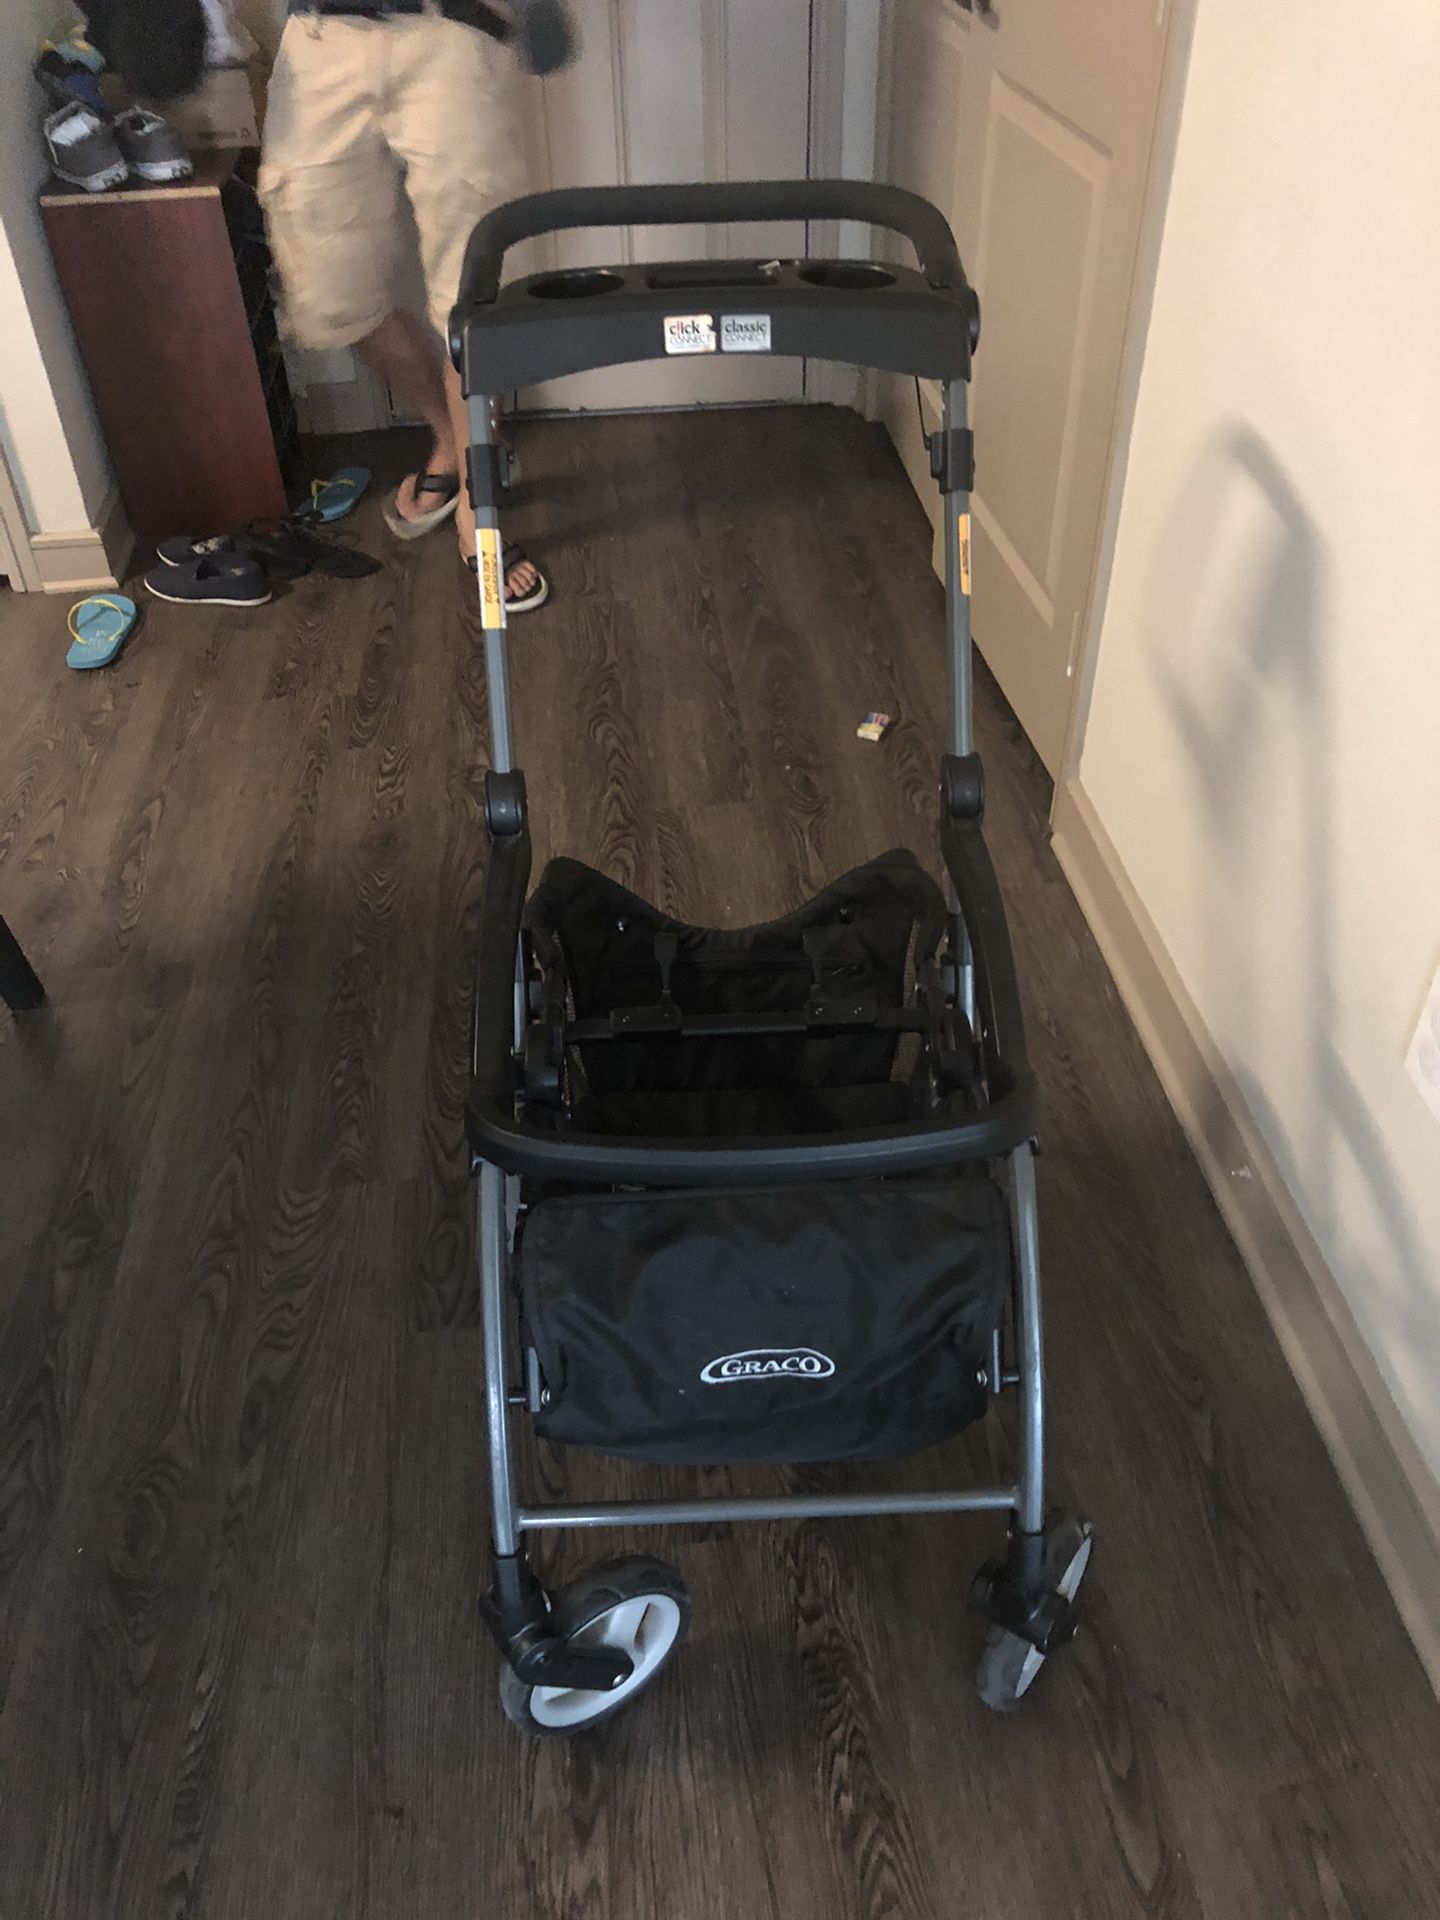 Graco Car seat Stroller stand for sale $40